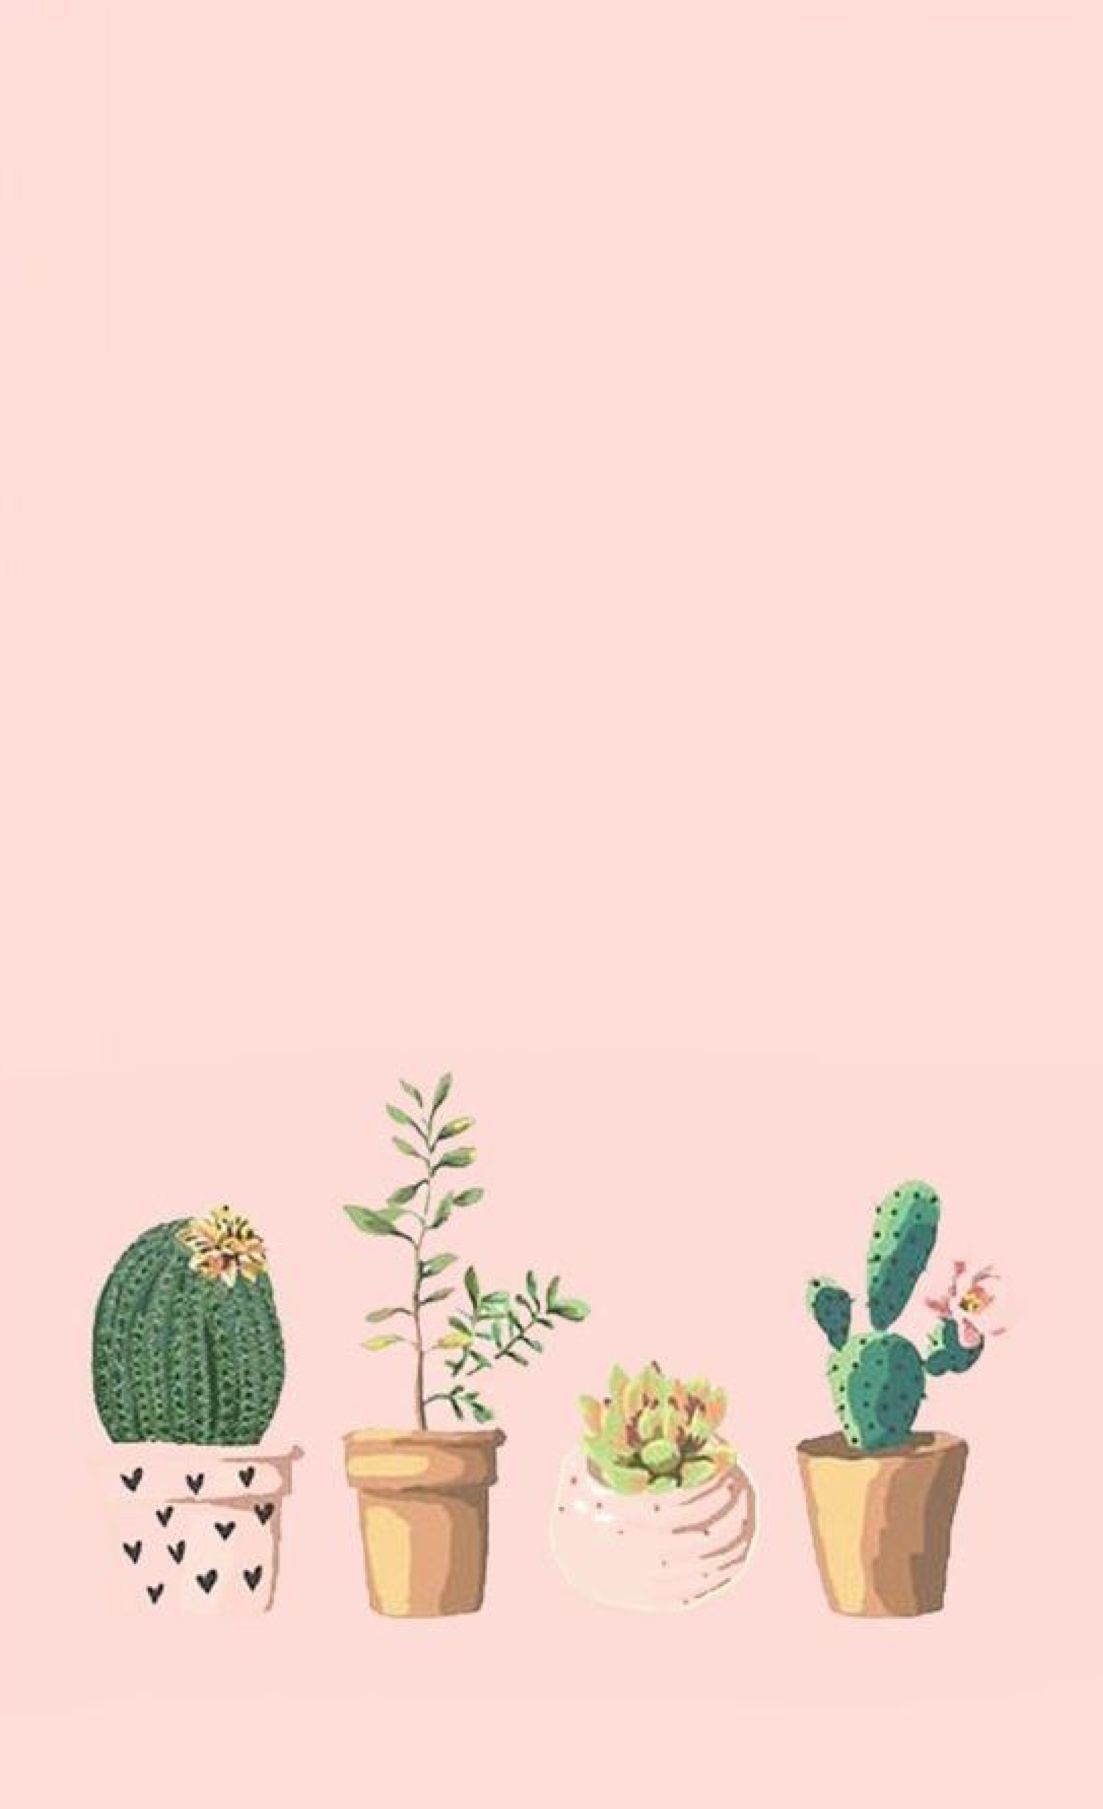 A wallpaper with pink background and cactus plants - Cactus